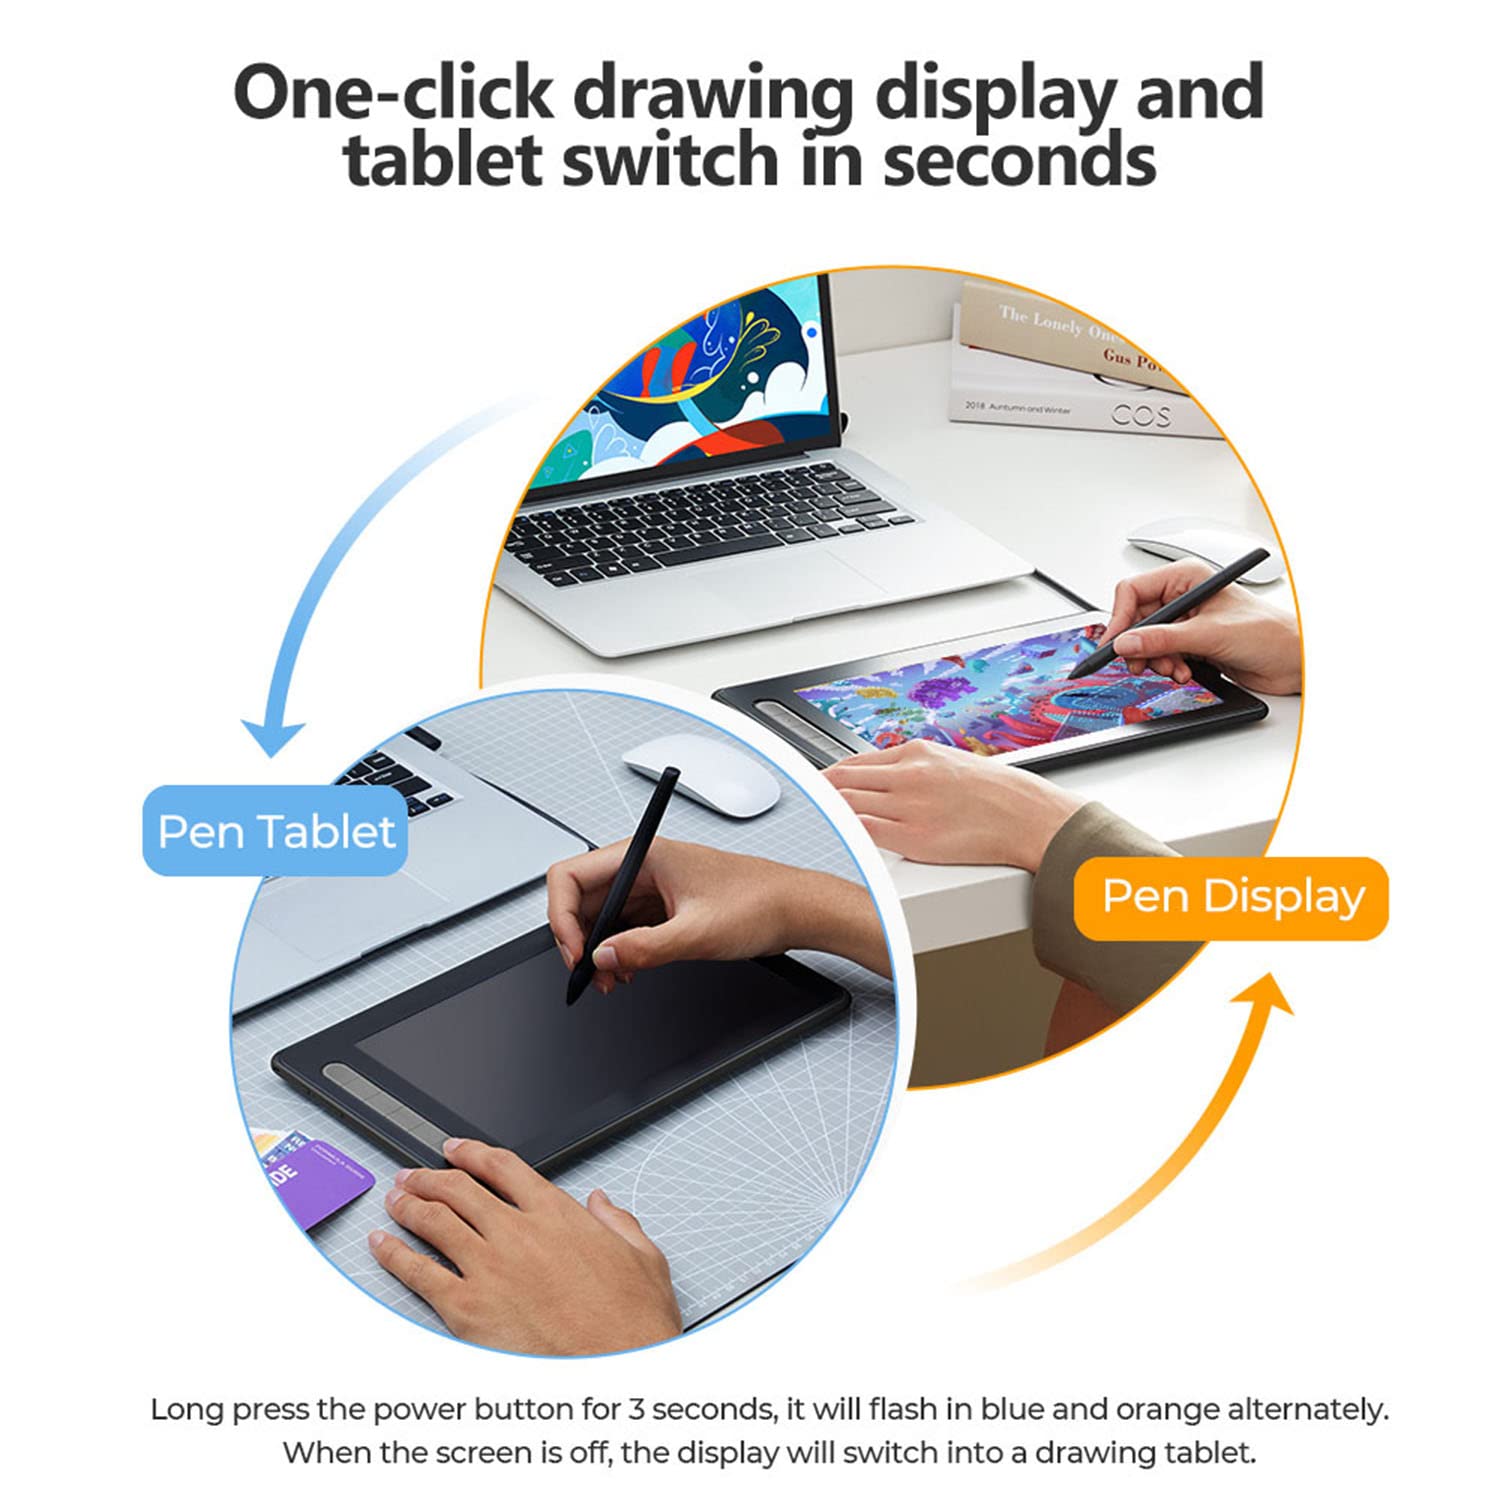 10x6"Graphic Tablet Drawing Pad with Digital Pen For Computer IOS  WINDOWS X3S2 | eBay